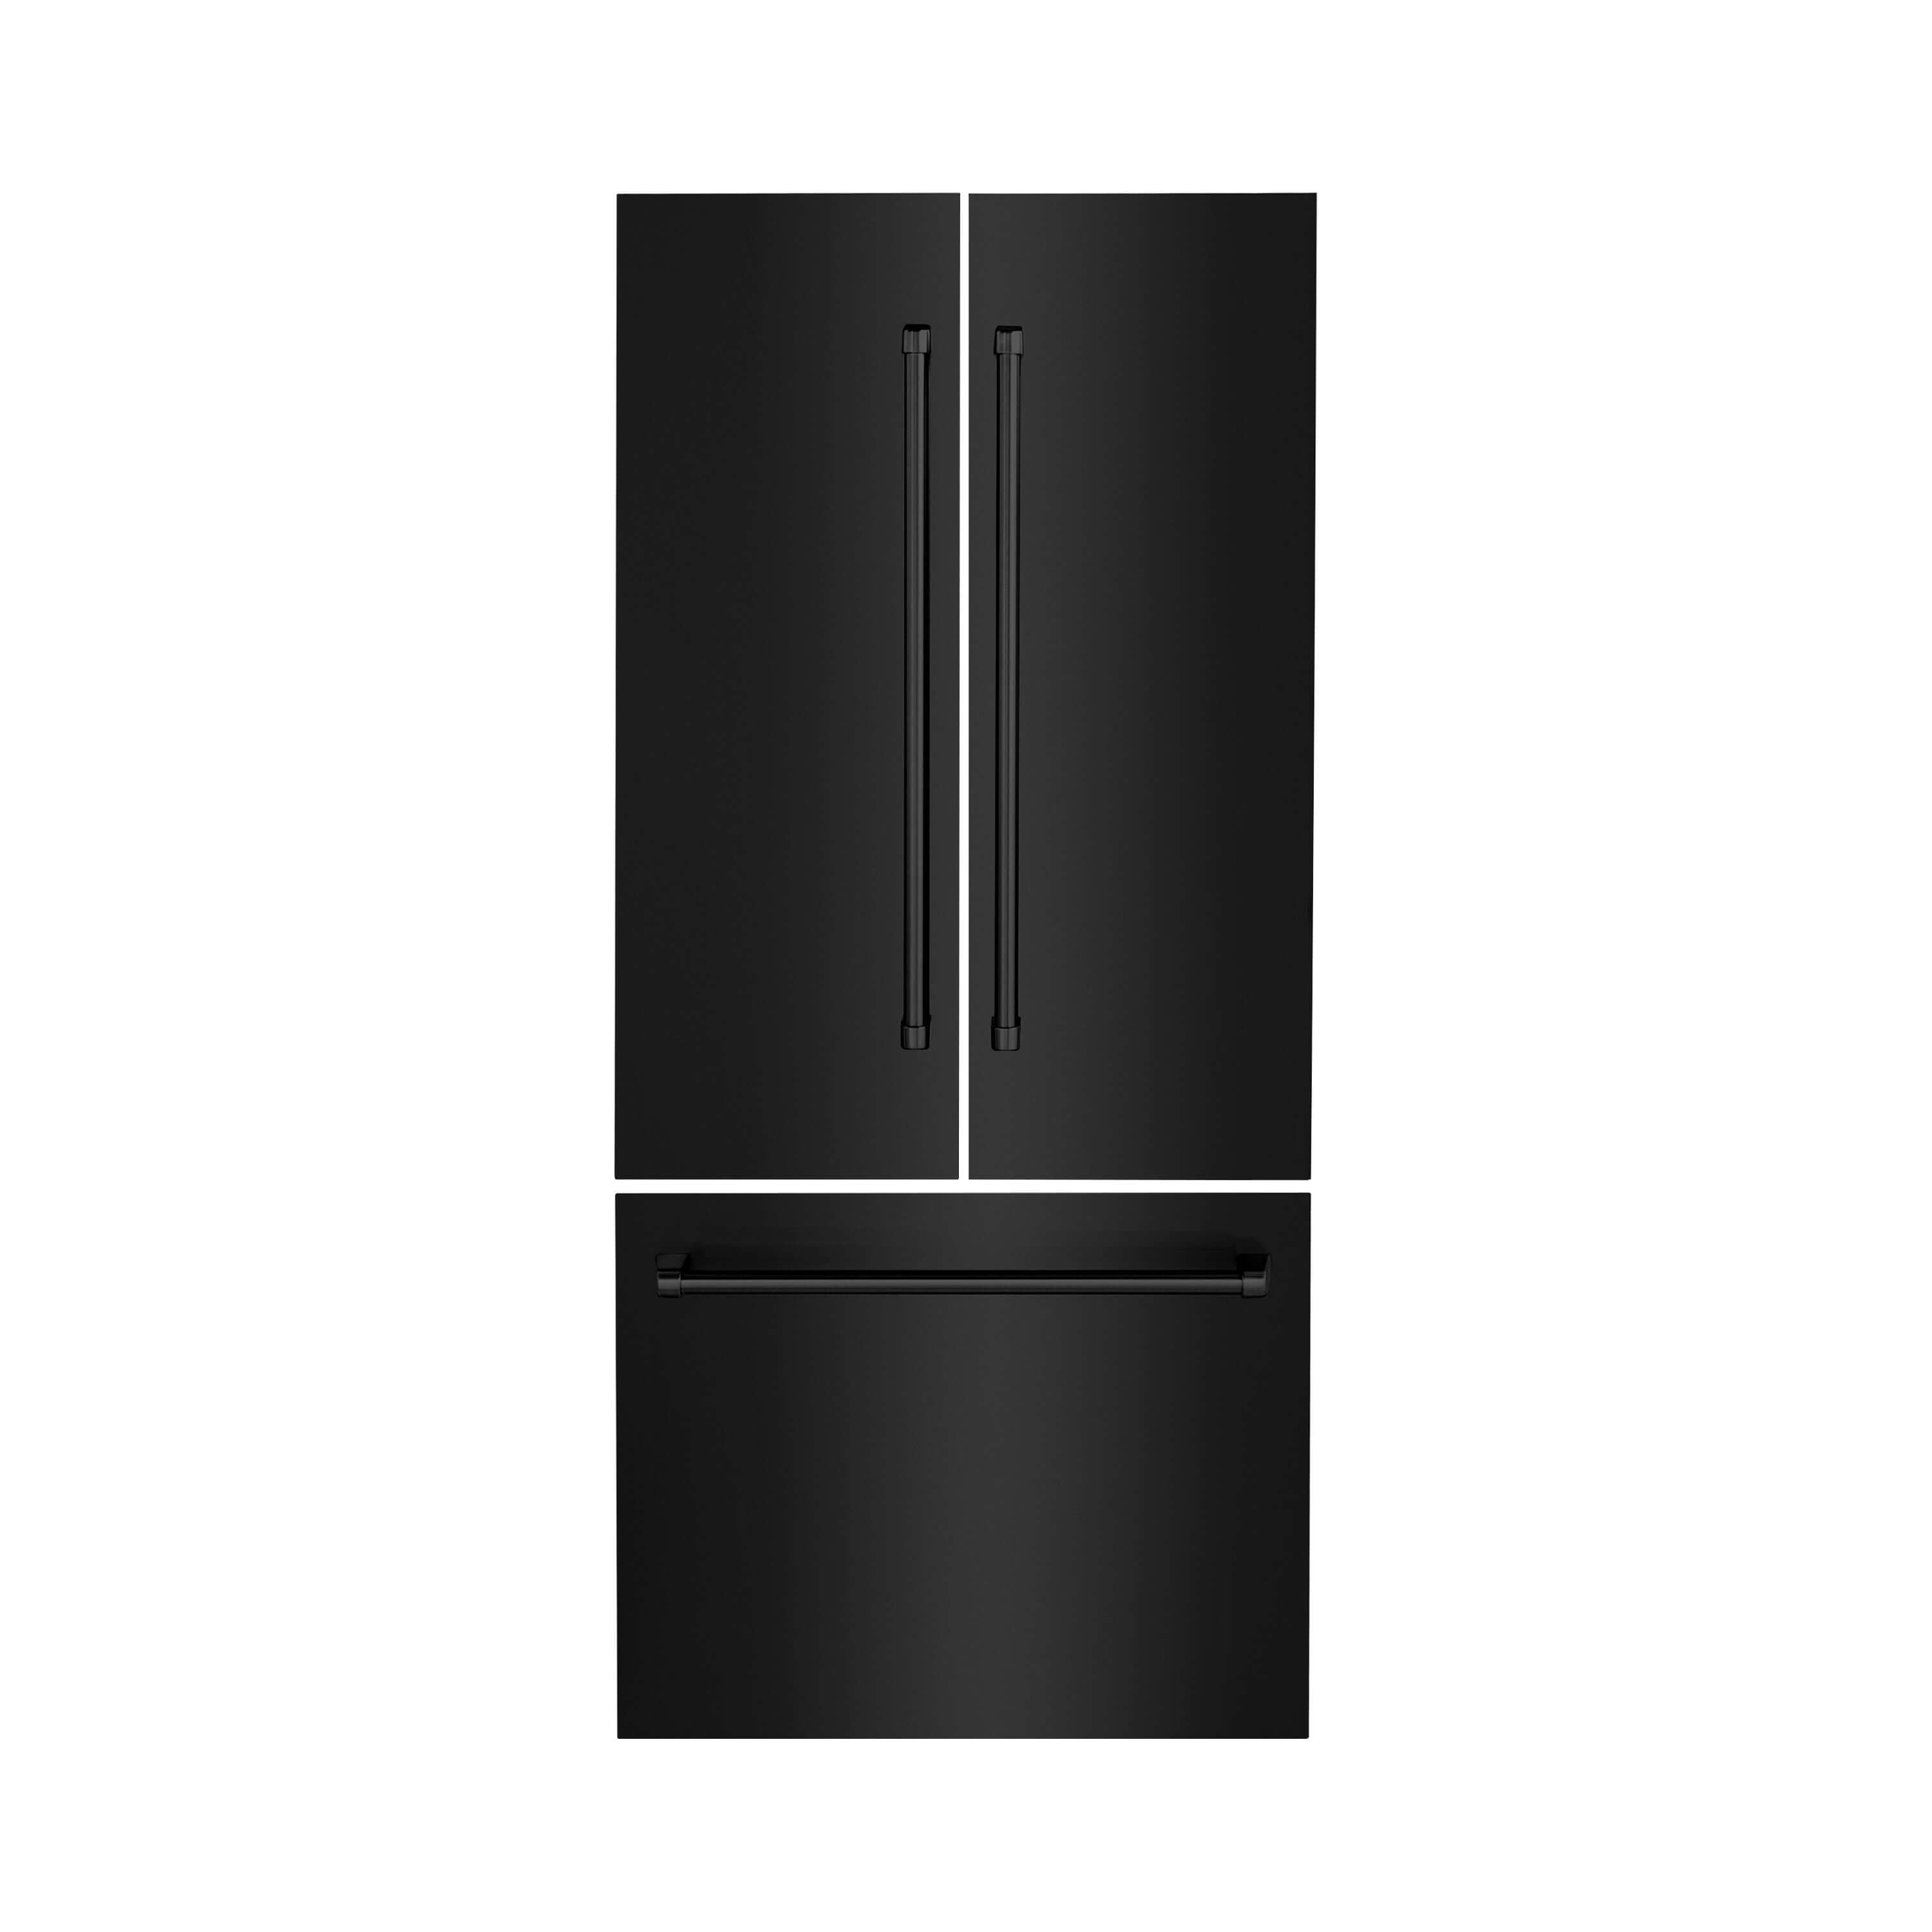 Panels & Handles Only- ZLINE 36 in. Refrigerator Panels in Black Stainless Steel for a 36 in. Built-in Refrigerator (RPBIV-BS-36)